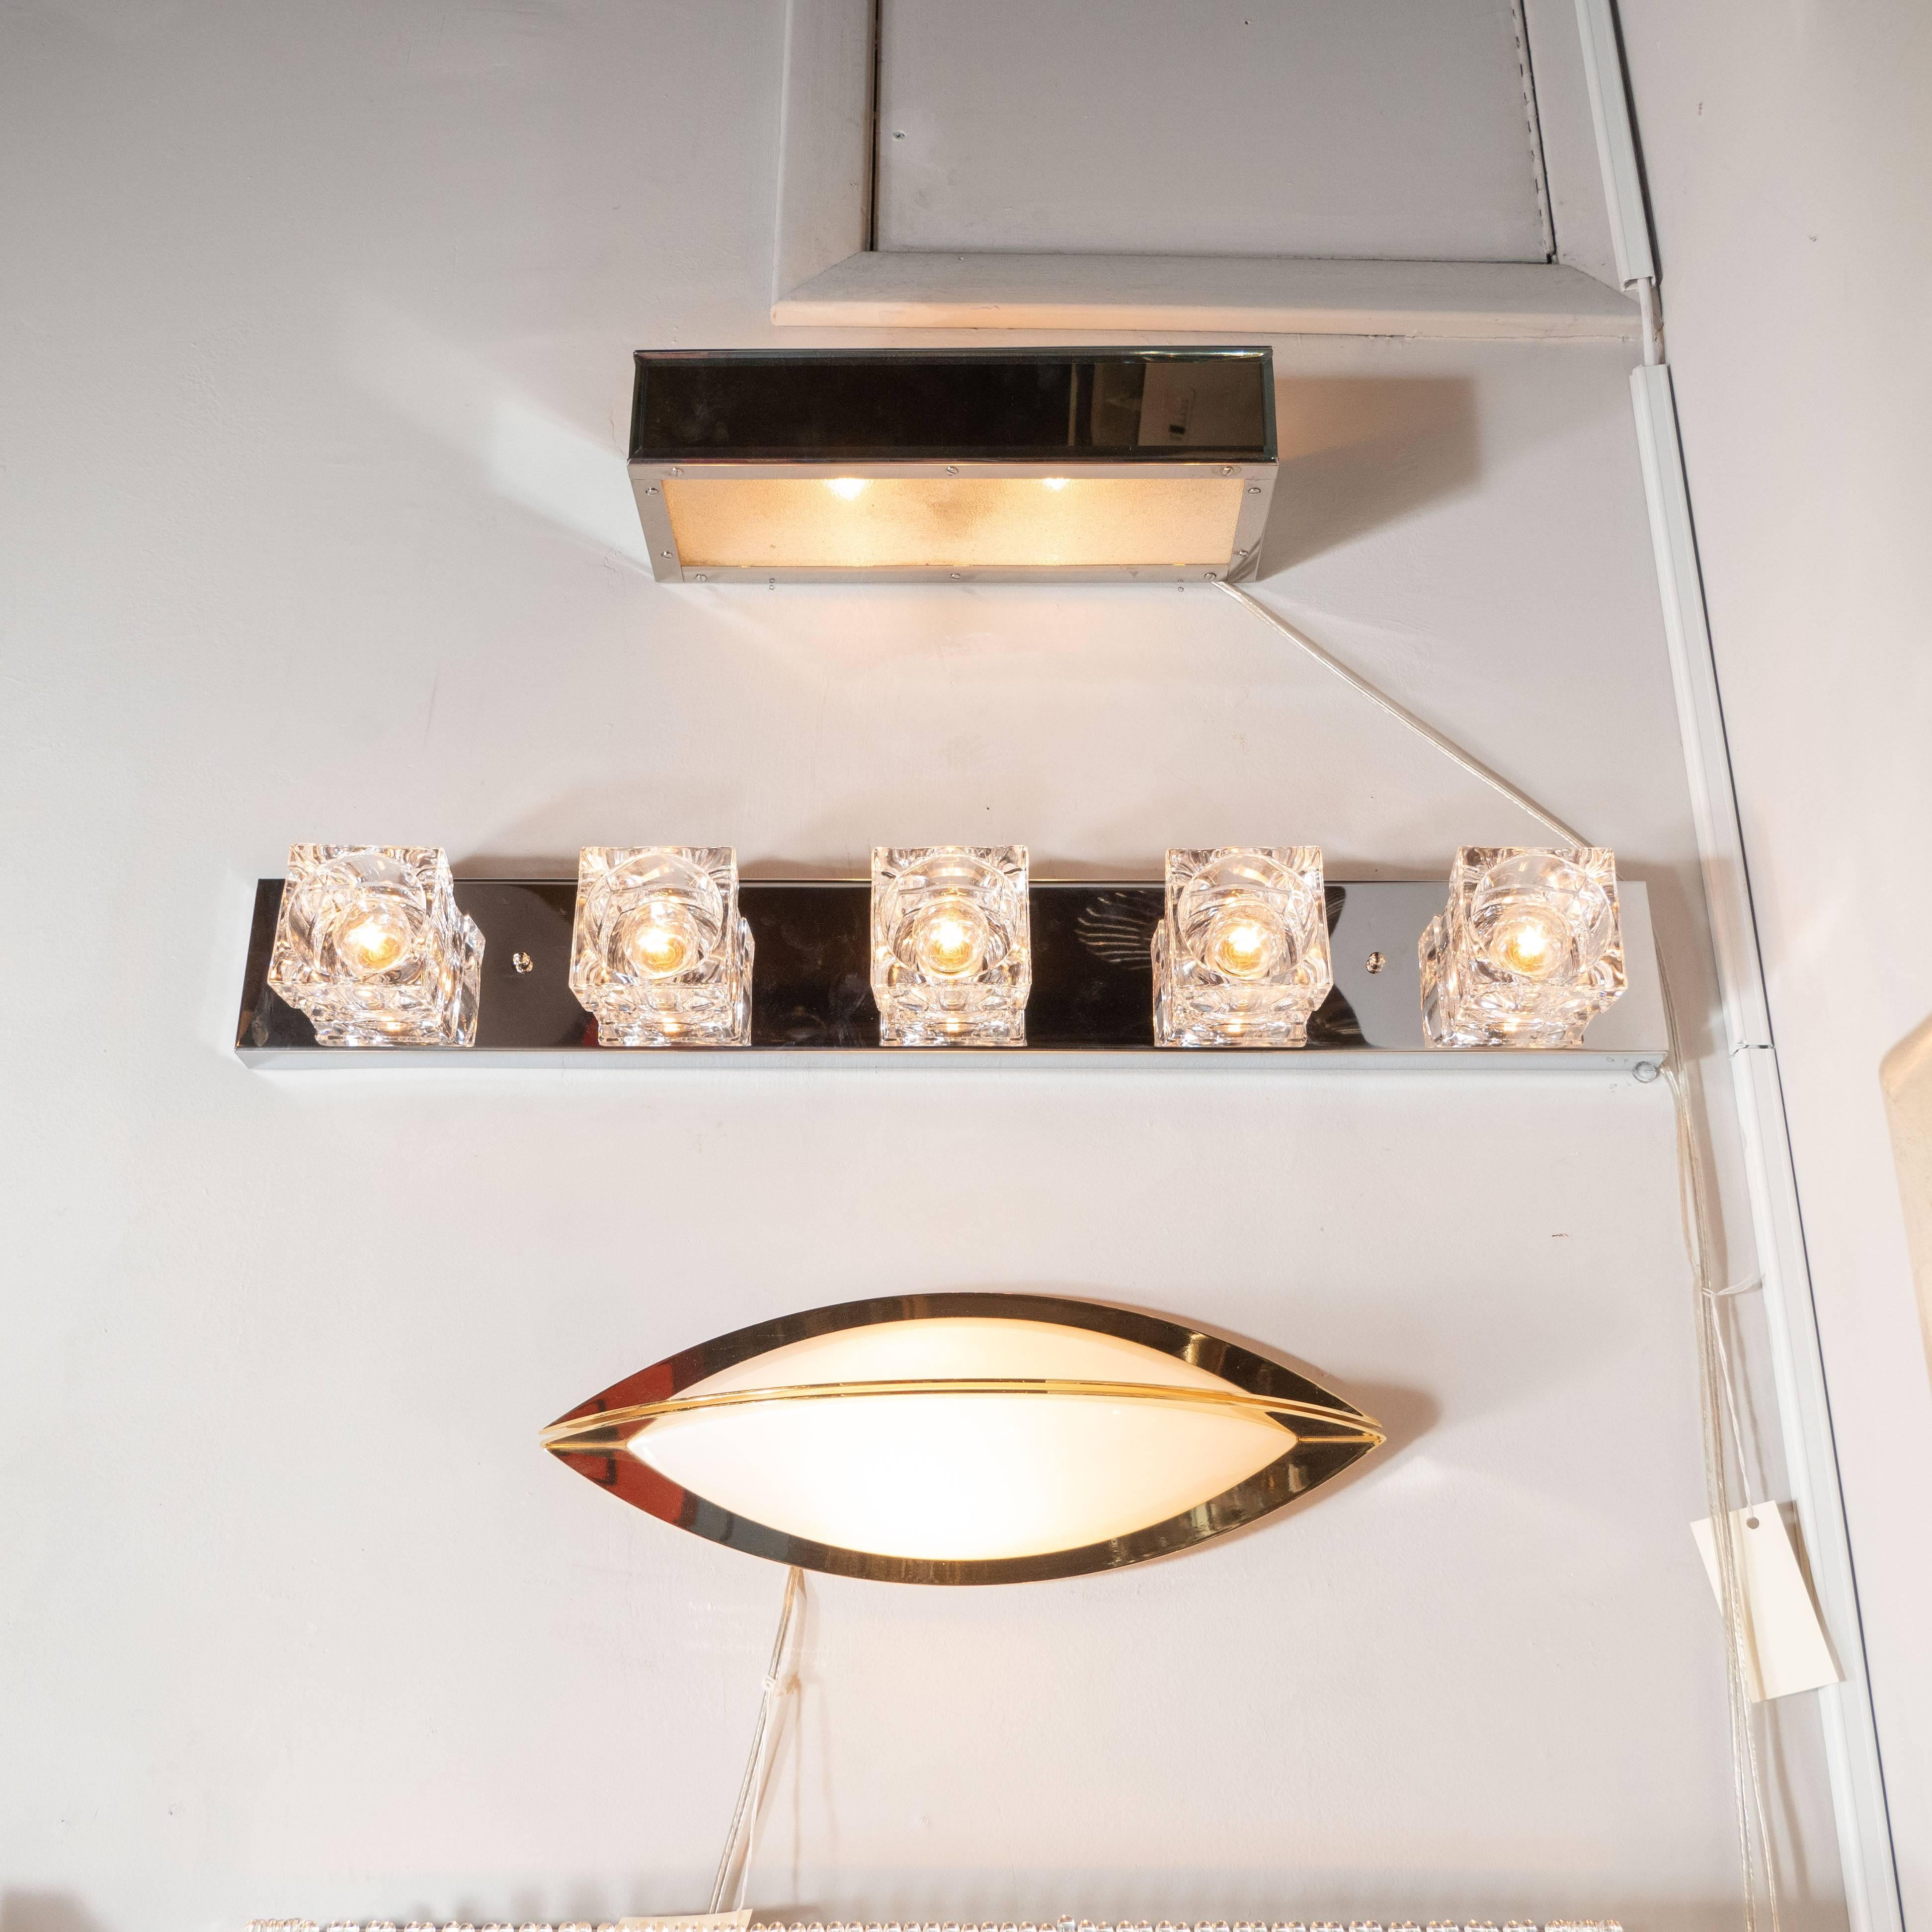 This stunning vanity light was realized by the fabled Italian designer, Sciolari, circa 1970. Part of their iconic 